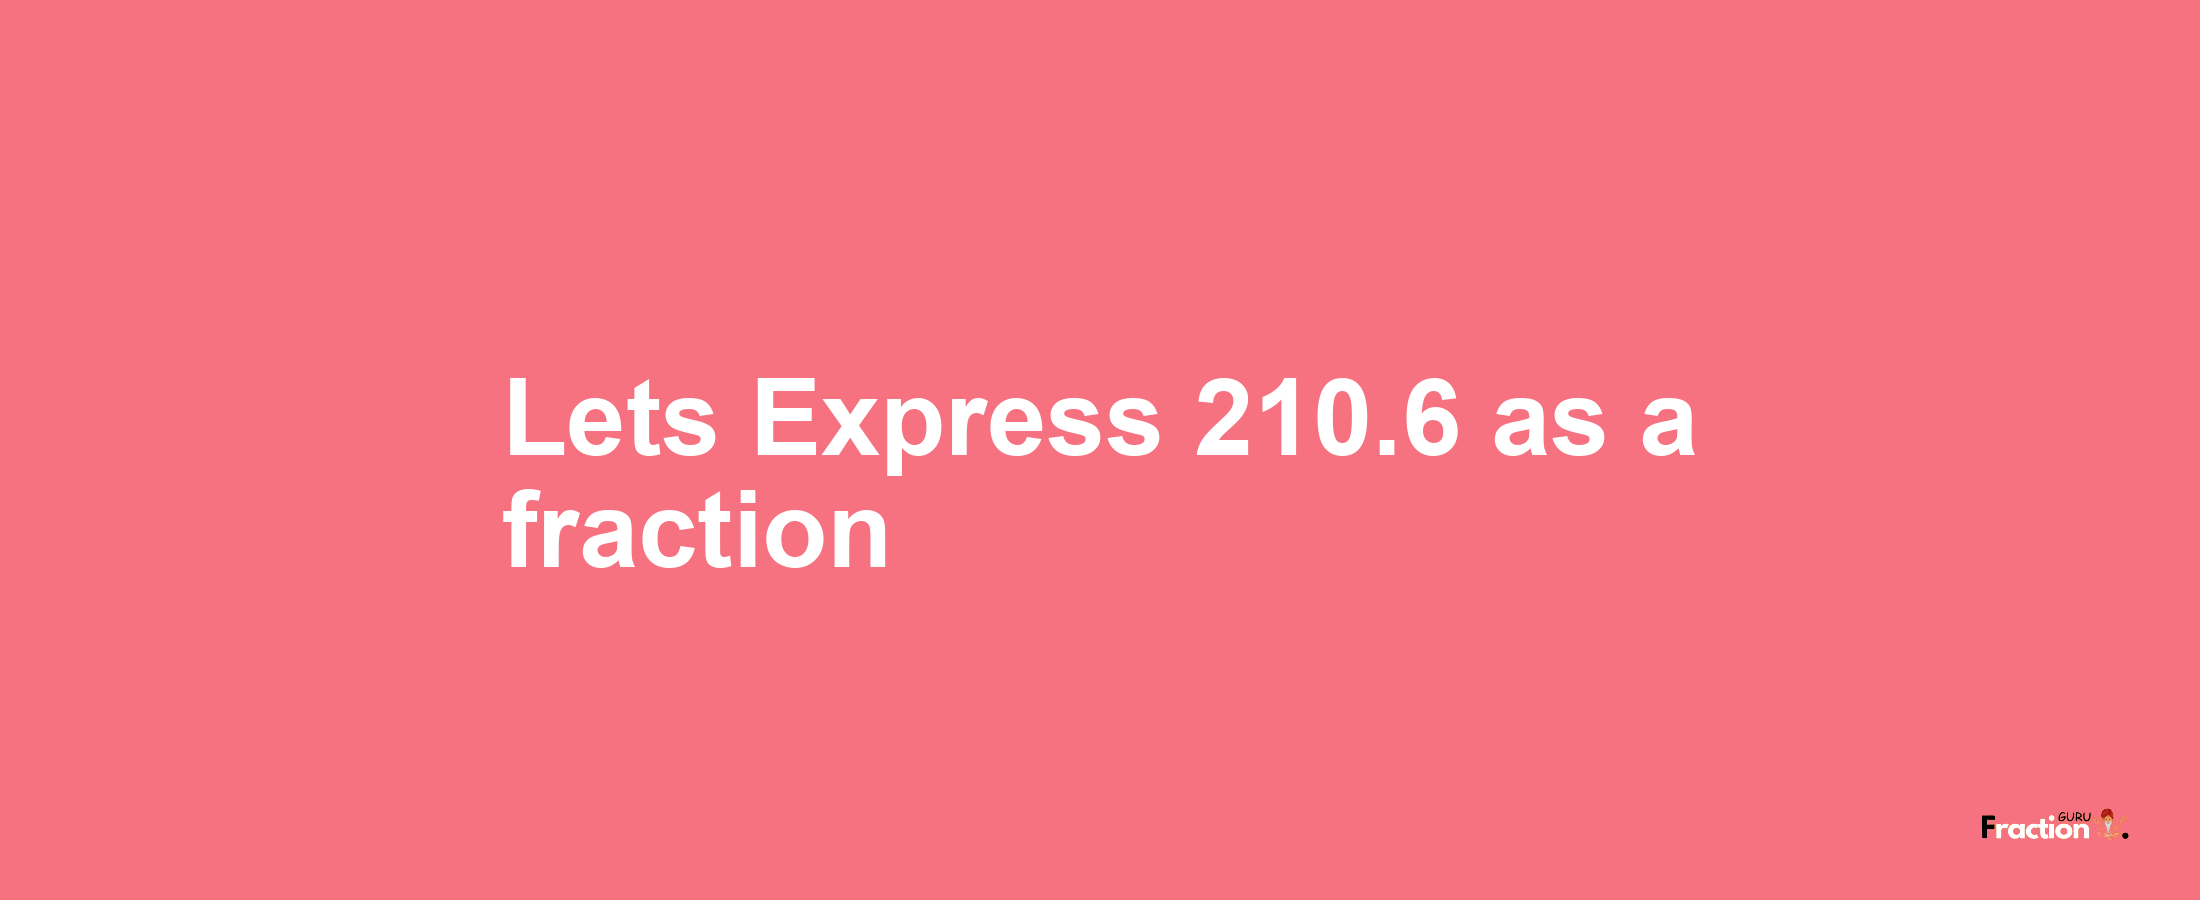 Lets Express 210.6 as afraction